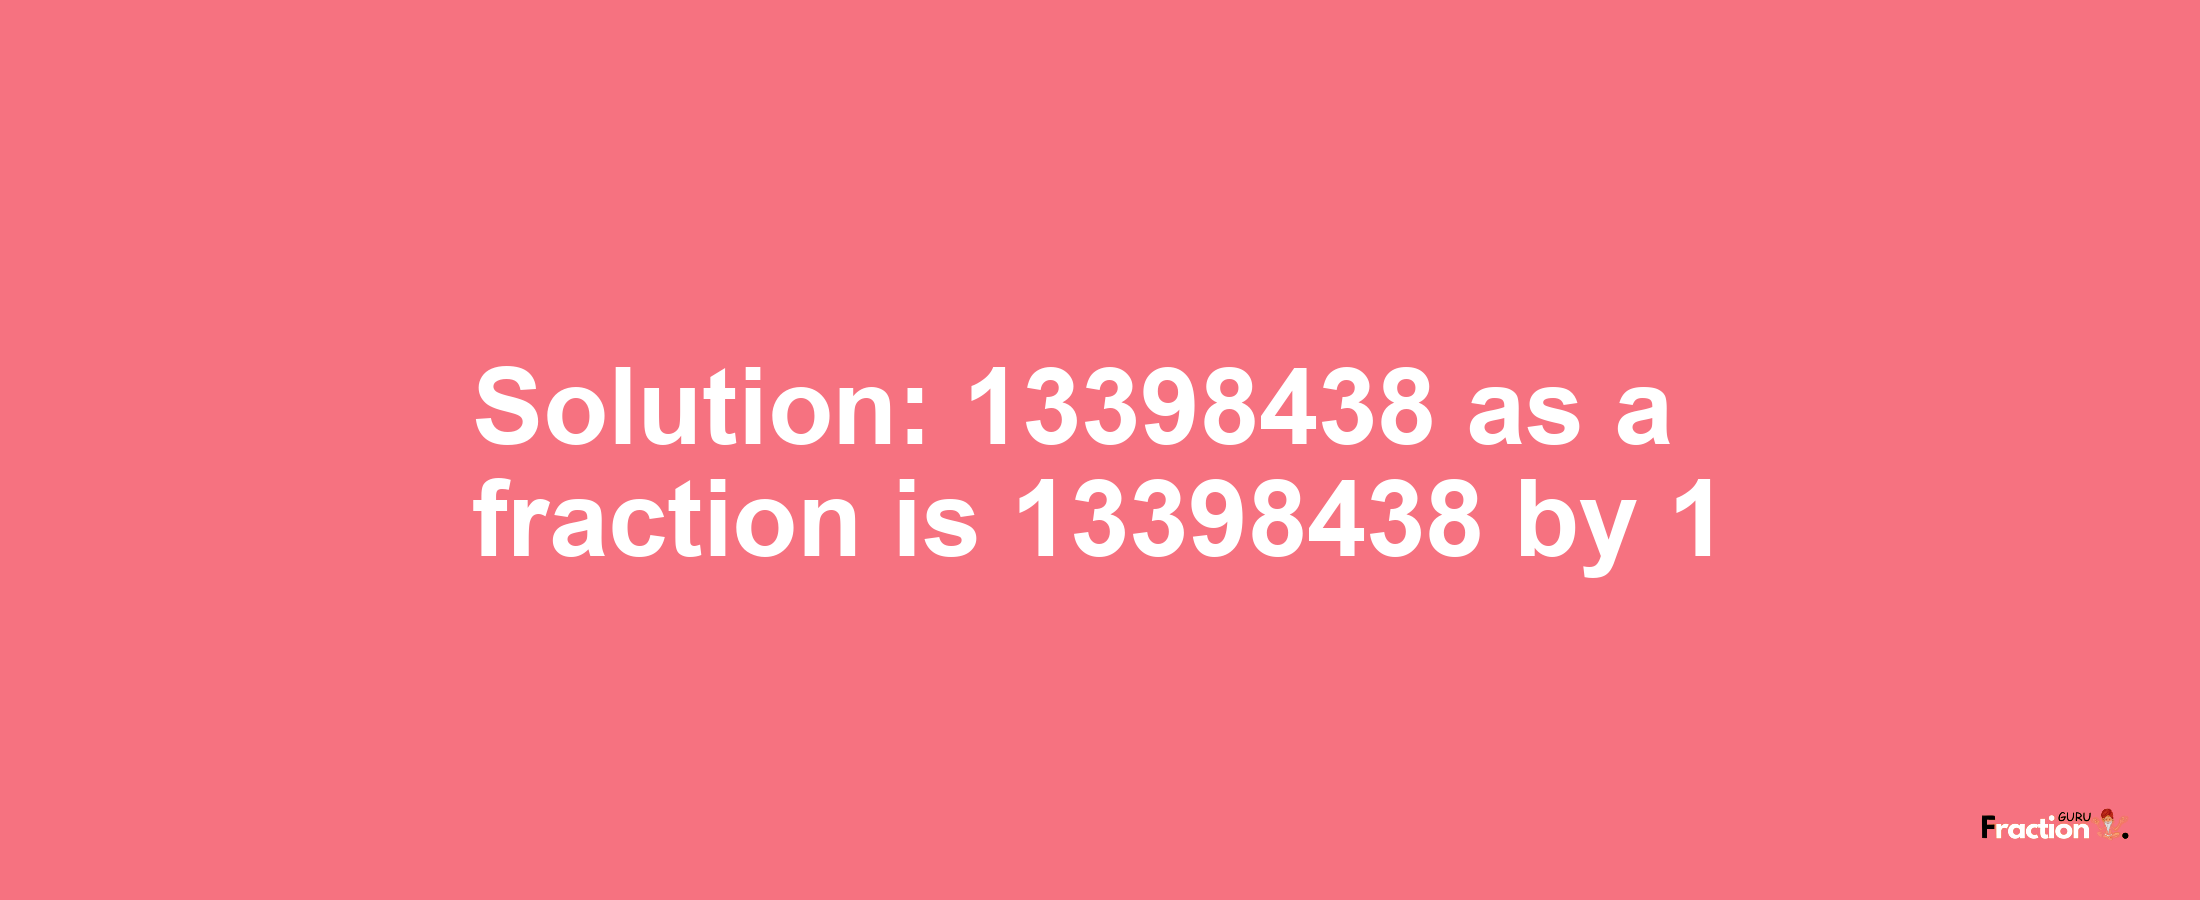 Solution:13398438 as a fraction is 13398438/1